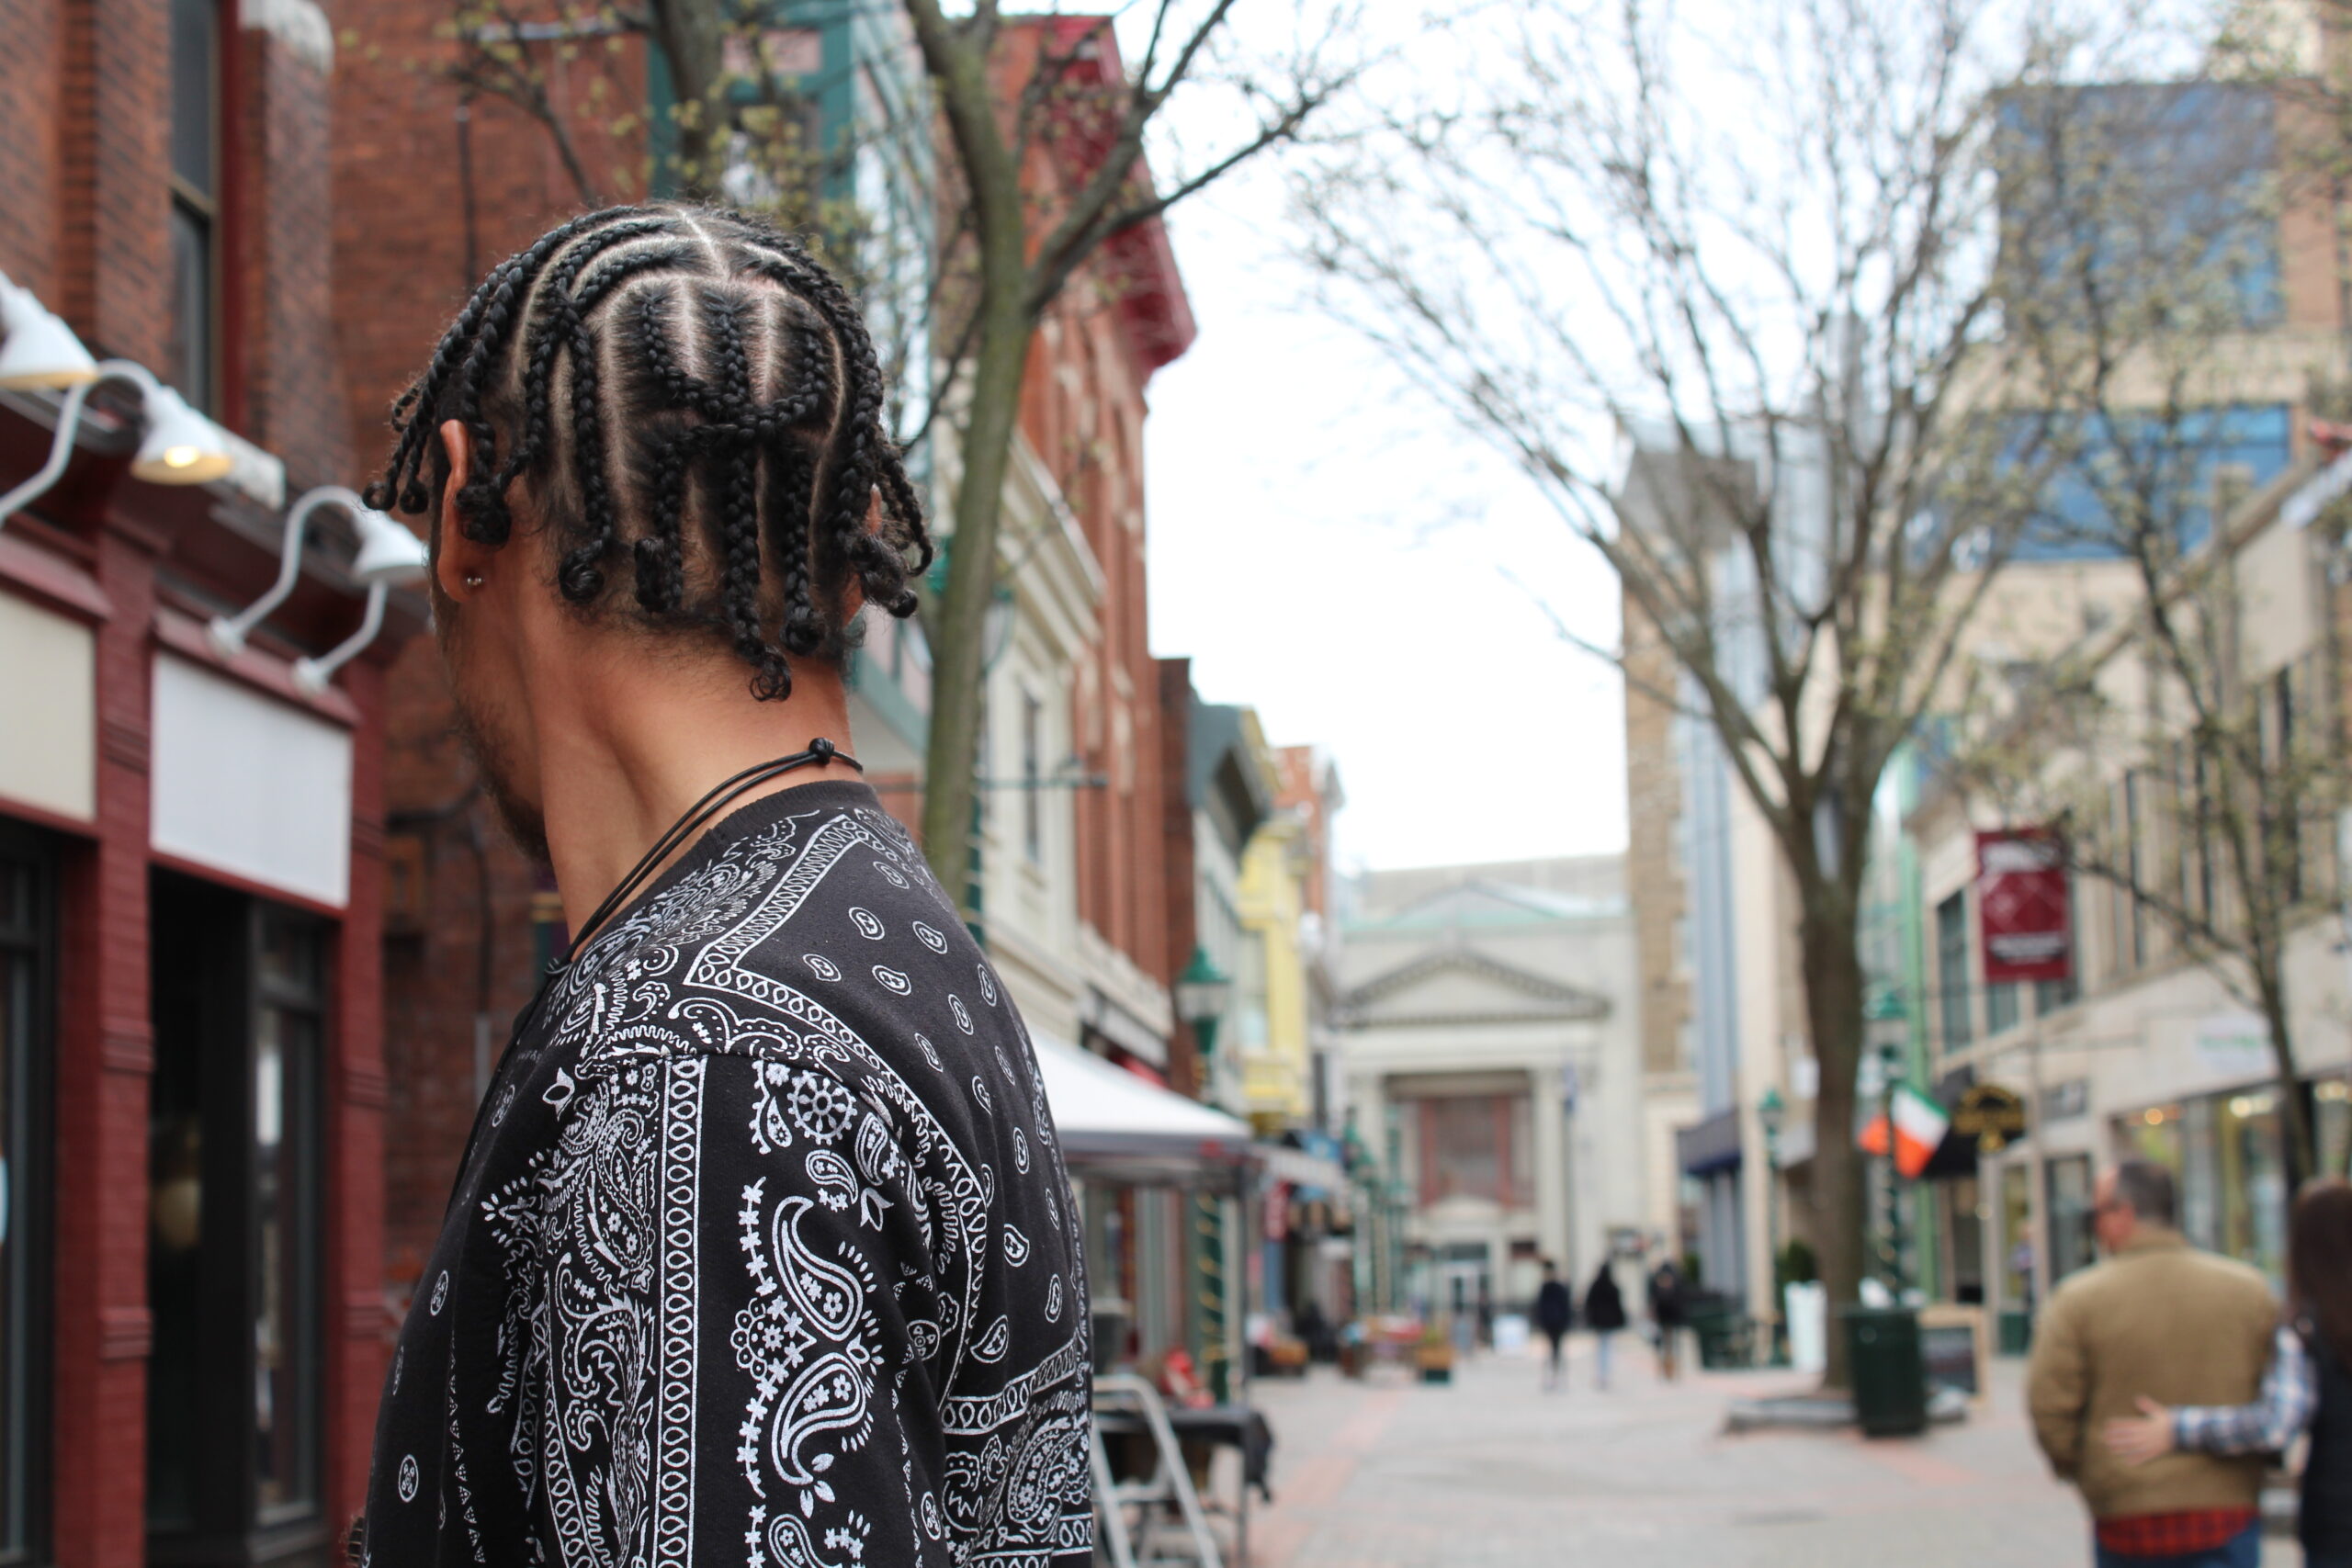 a man looks away fom the camera showing off his braids